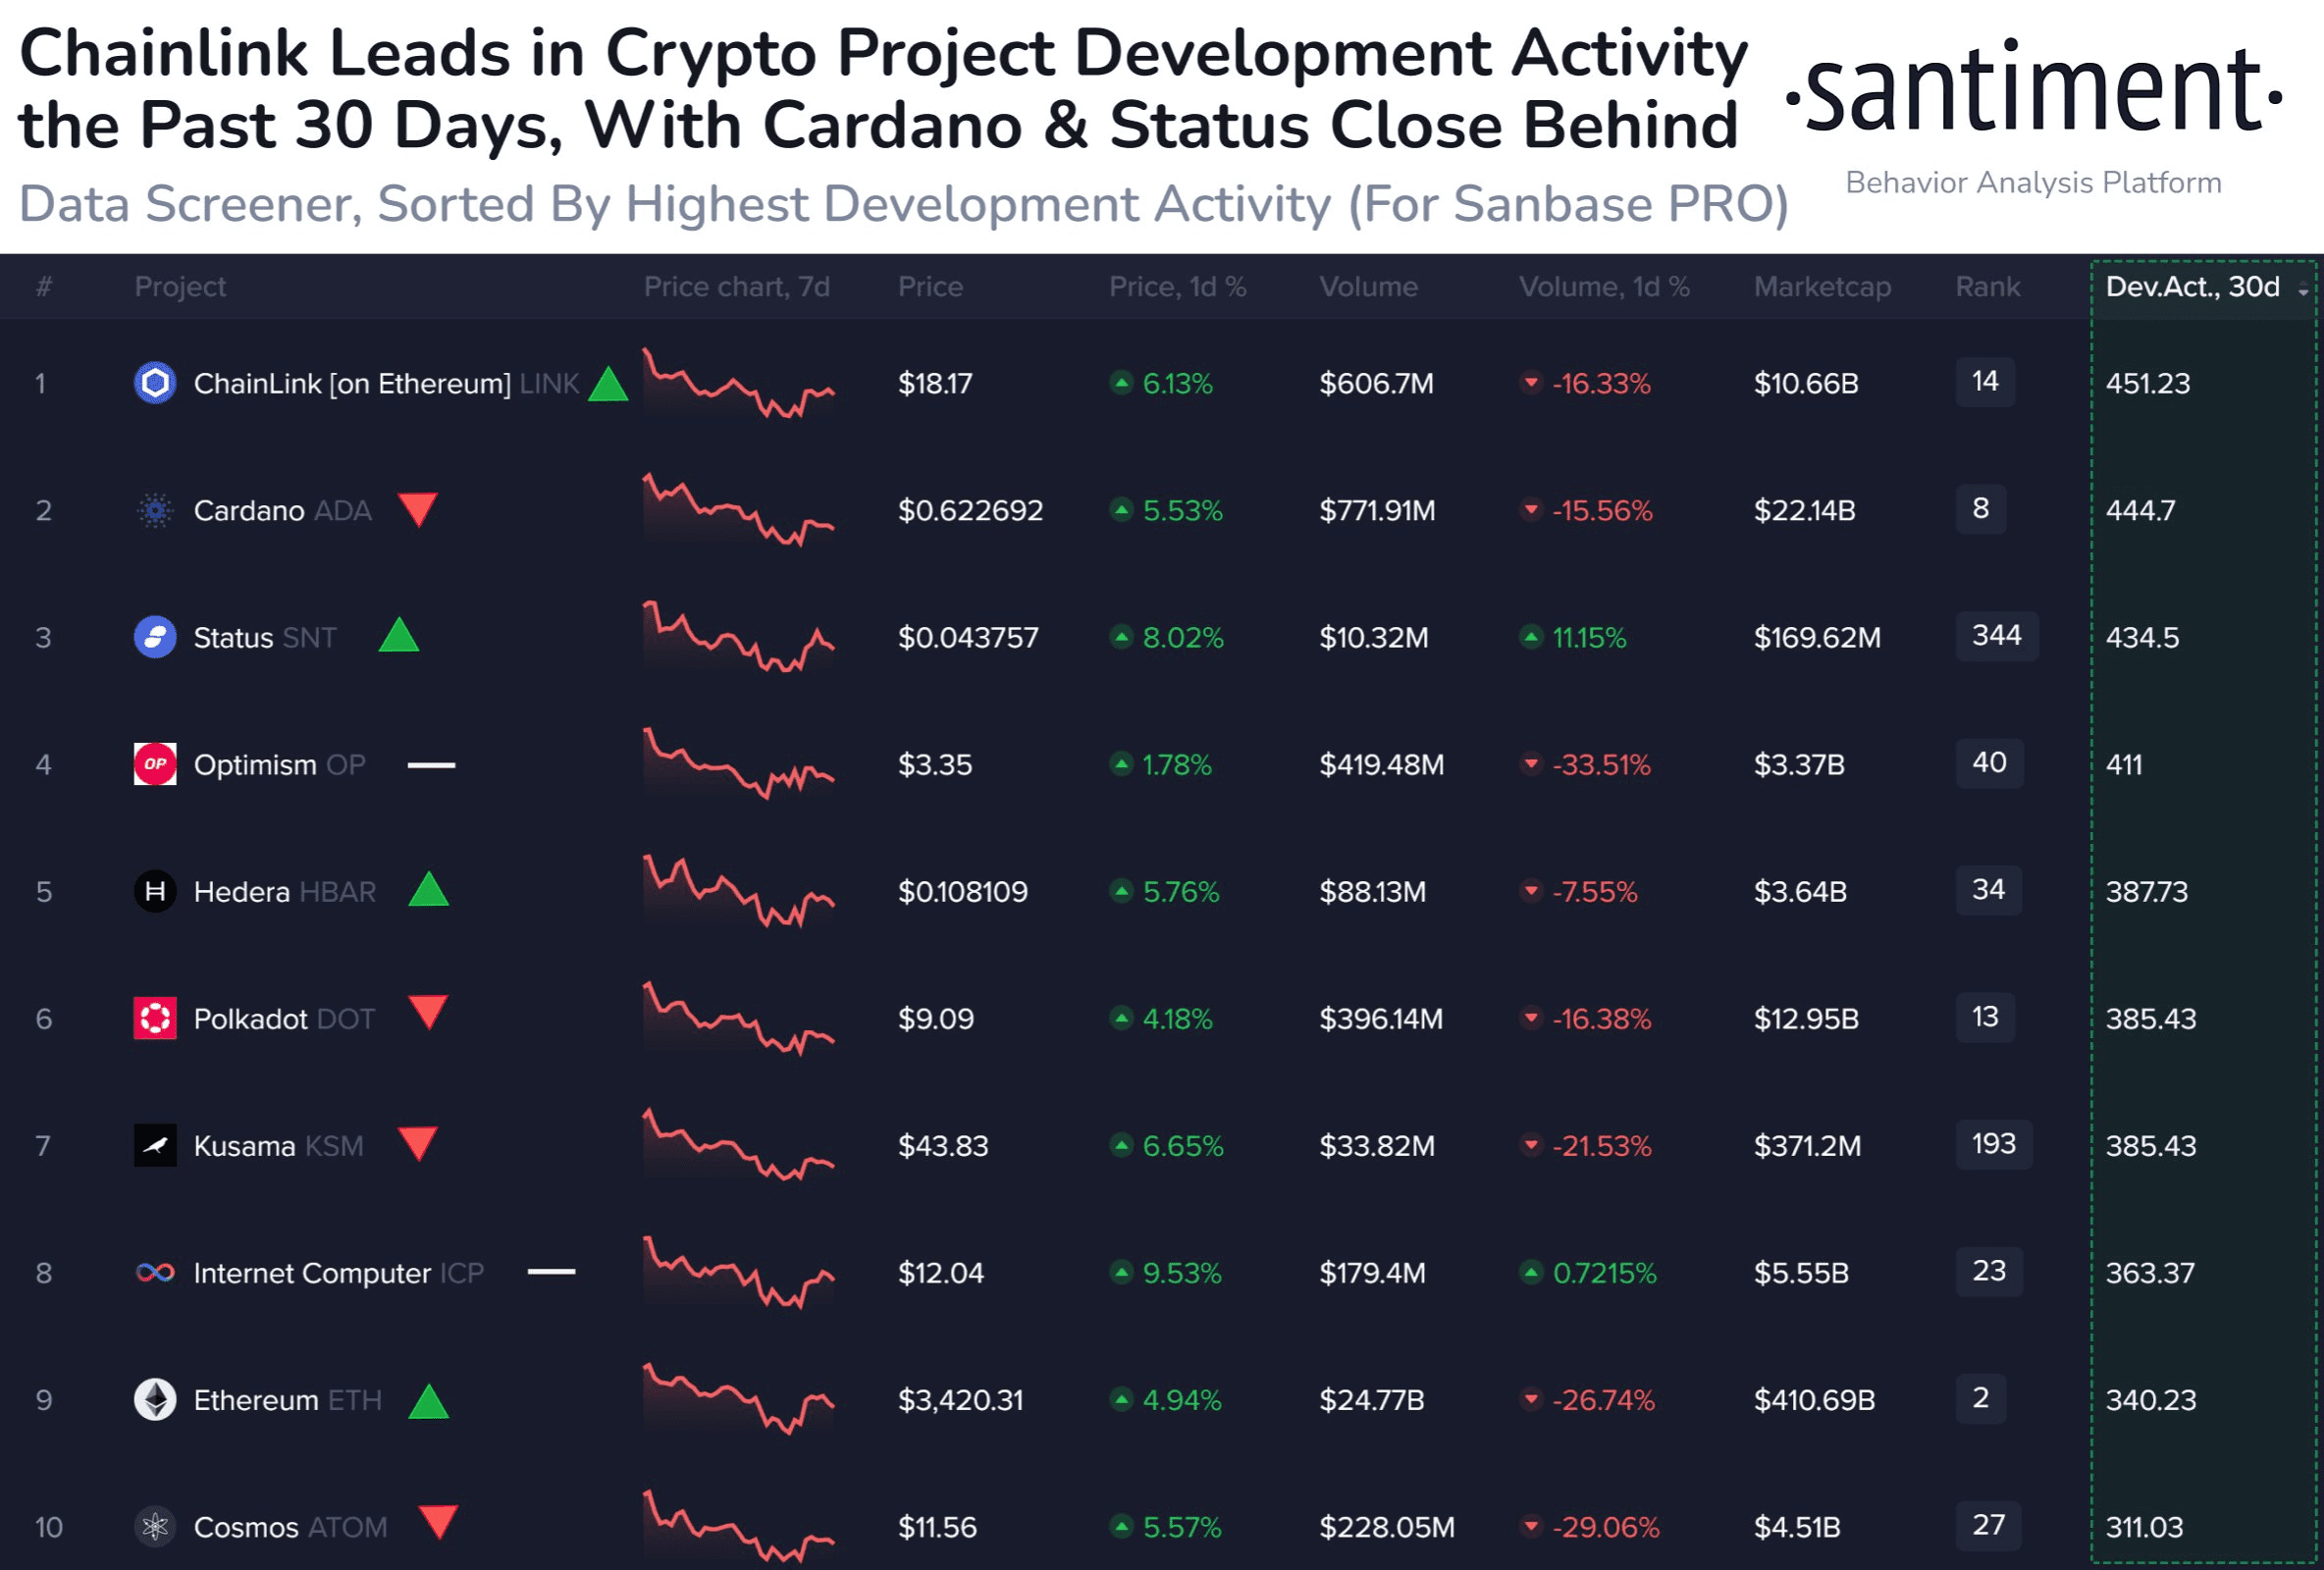 Top altcoins by developer activity